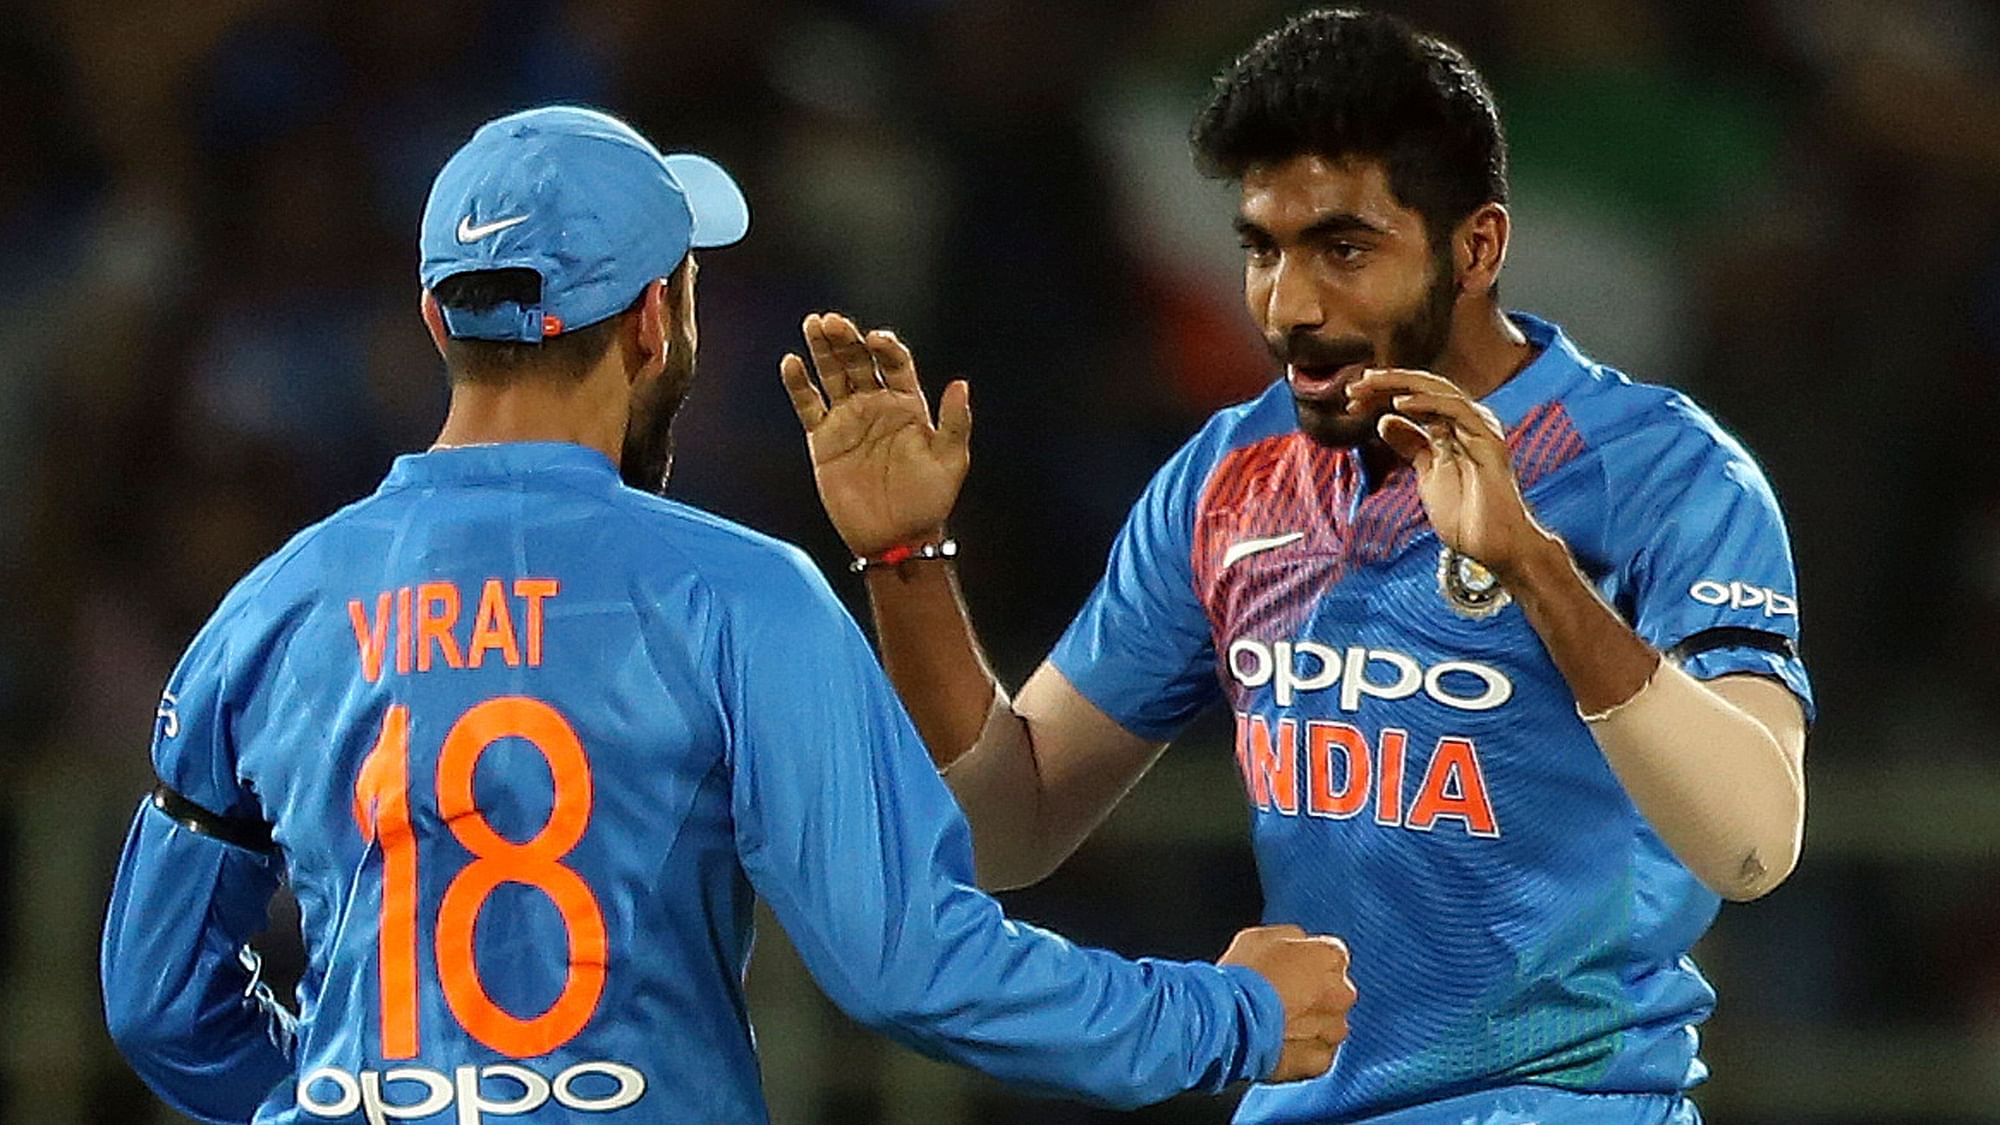 Jasprit Bumrah (3/16) very nearly took India to an improbable victory with a sensational 19th over in the first T20I against Australia at Visakhapatnam.